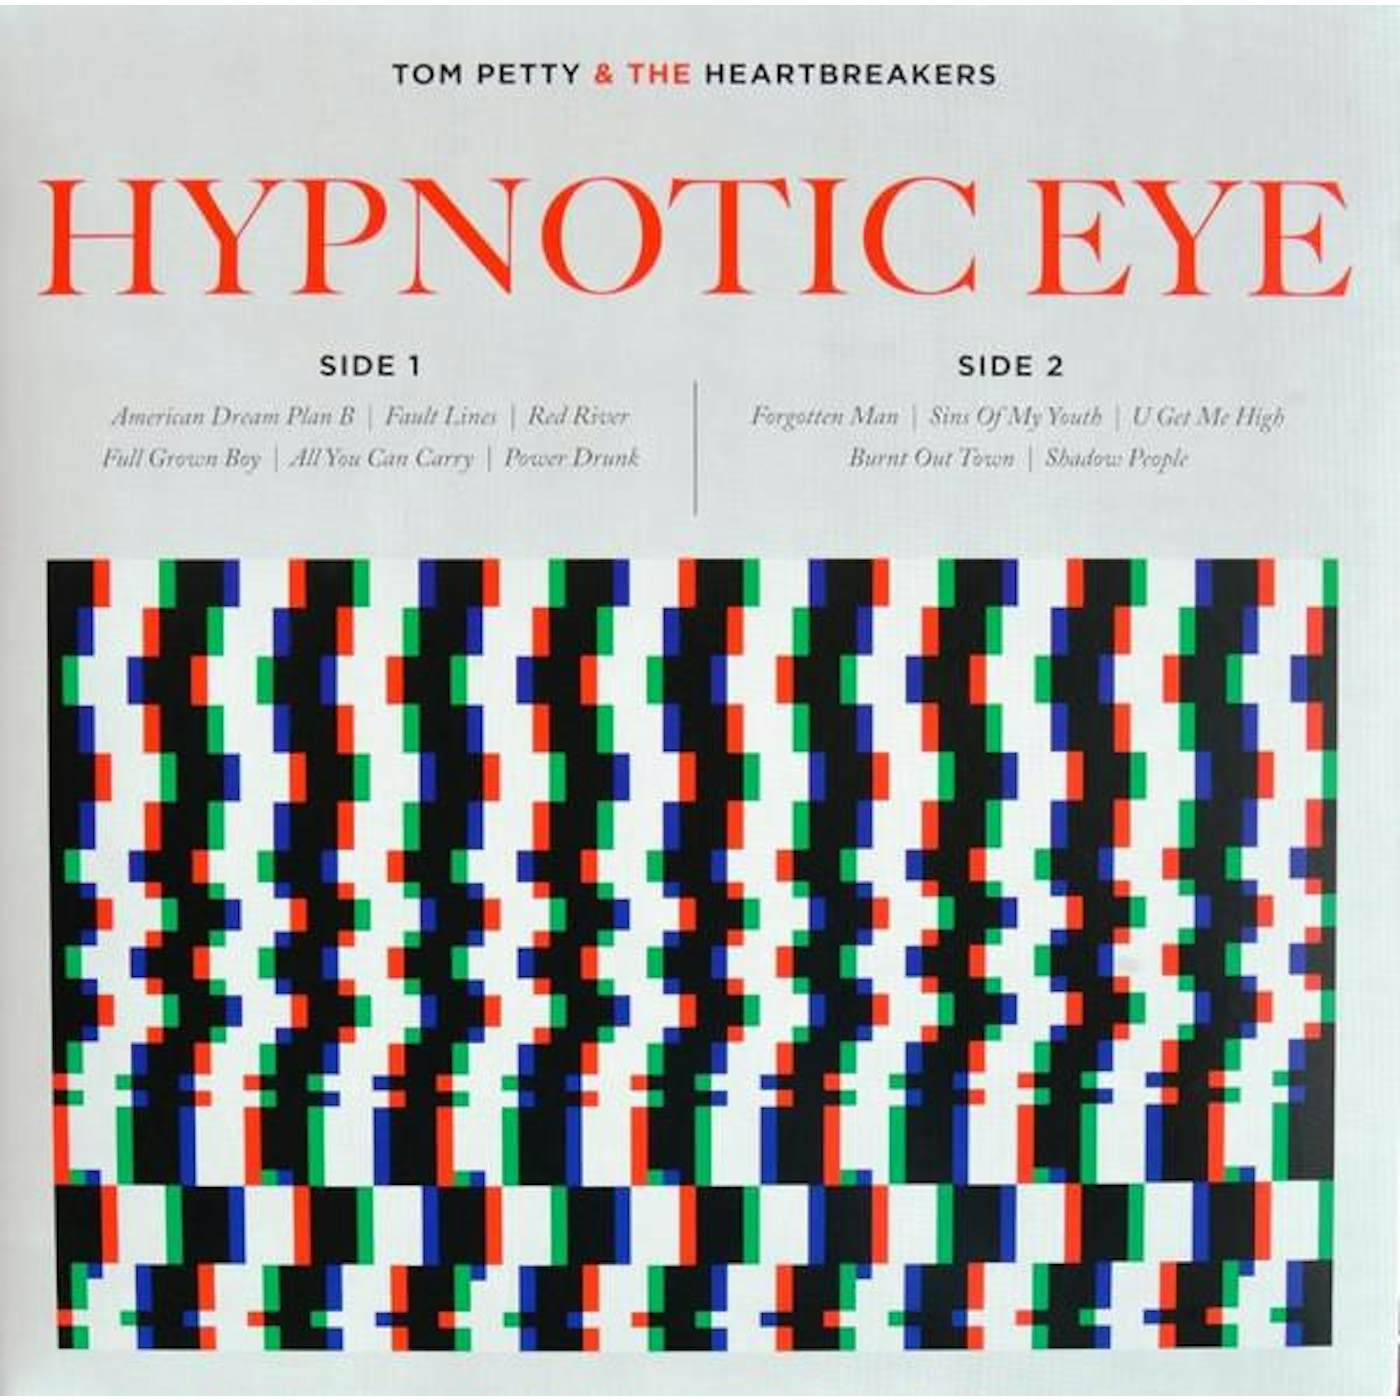 Tom Petty and the Heartbreakers Hypnotic Eye Vinyl Record